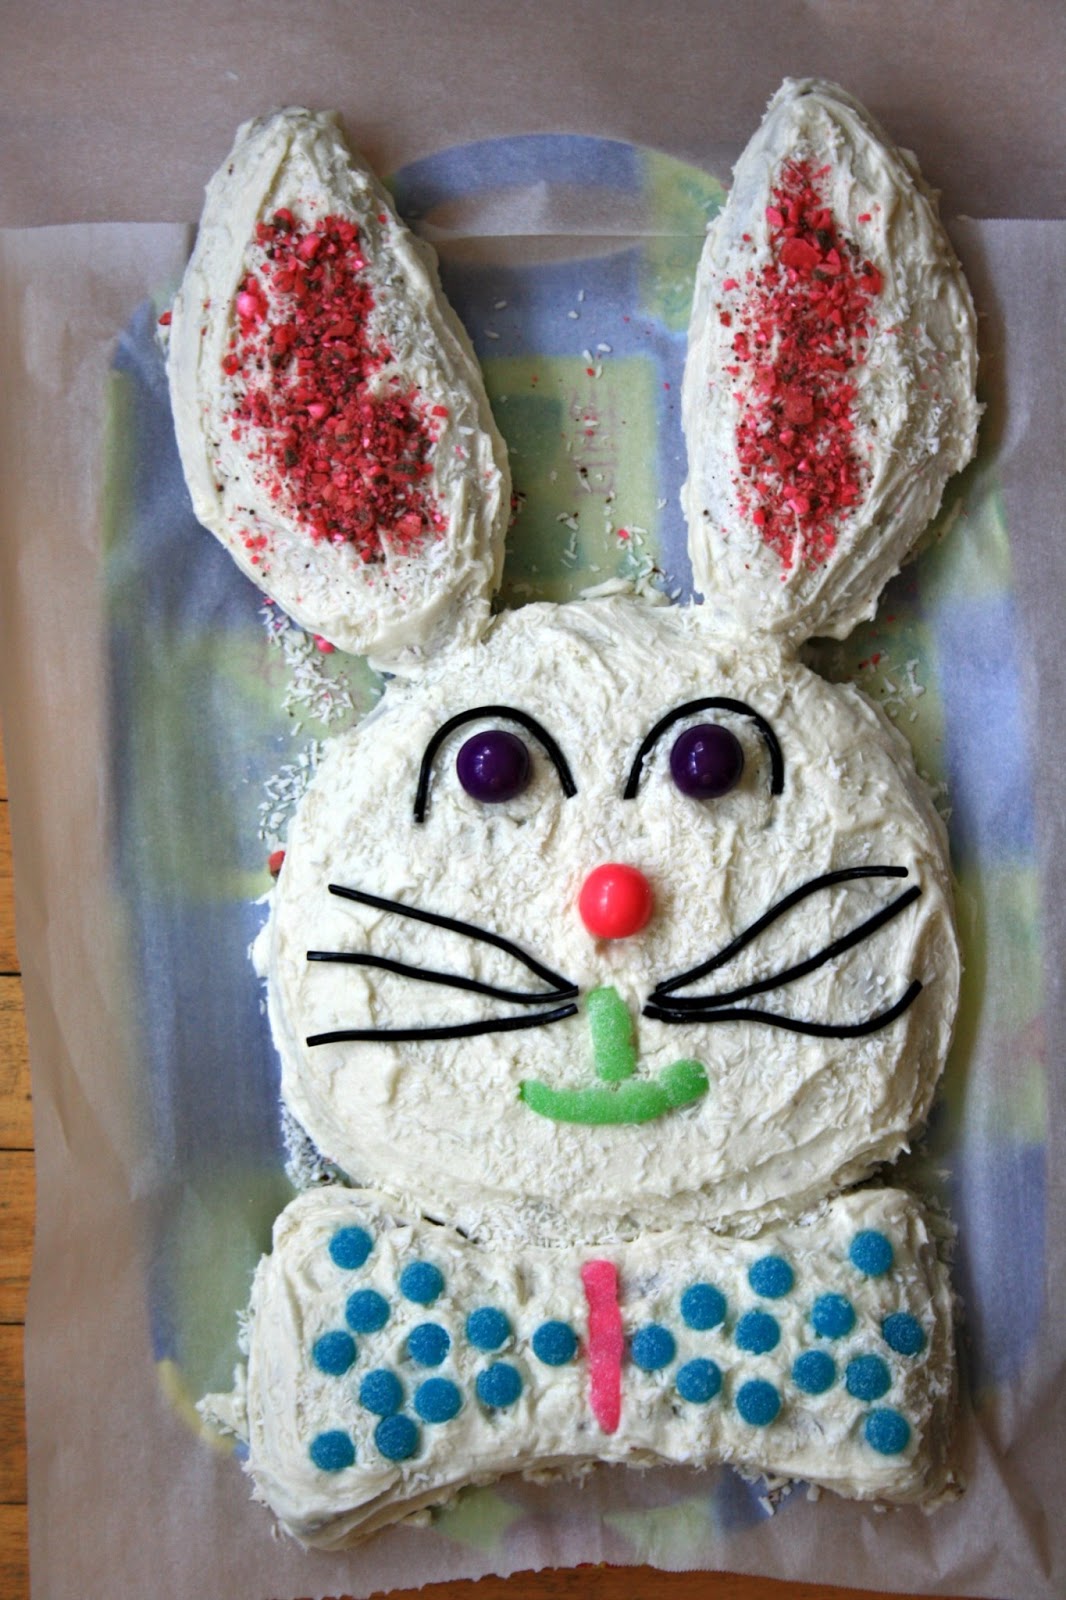 Easy Easter Bunny Cake is fun to make with kids